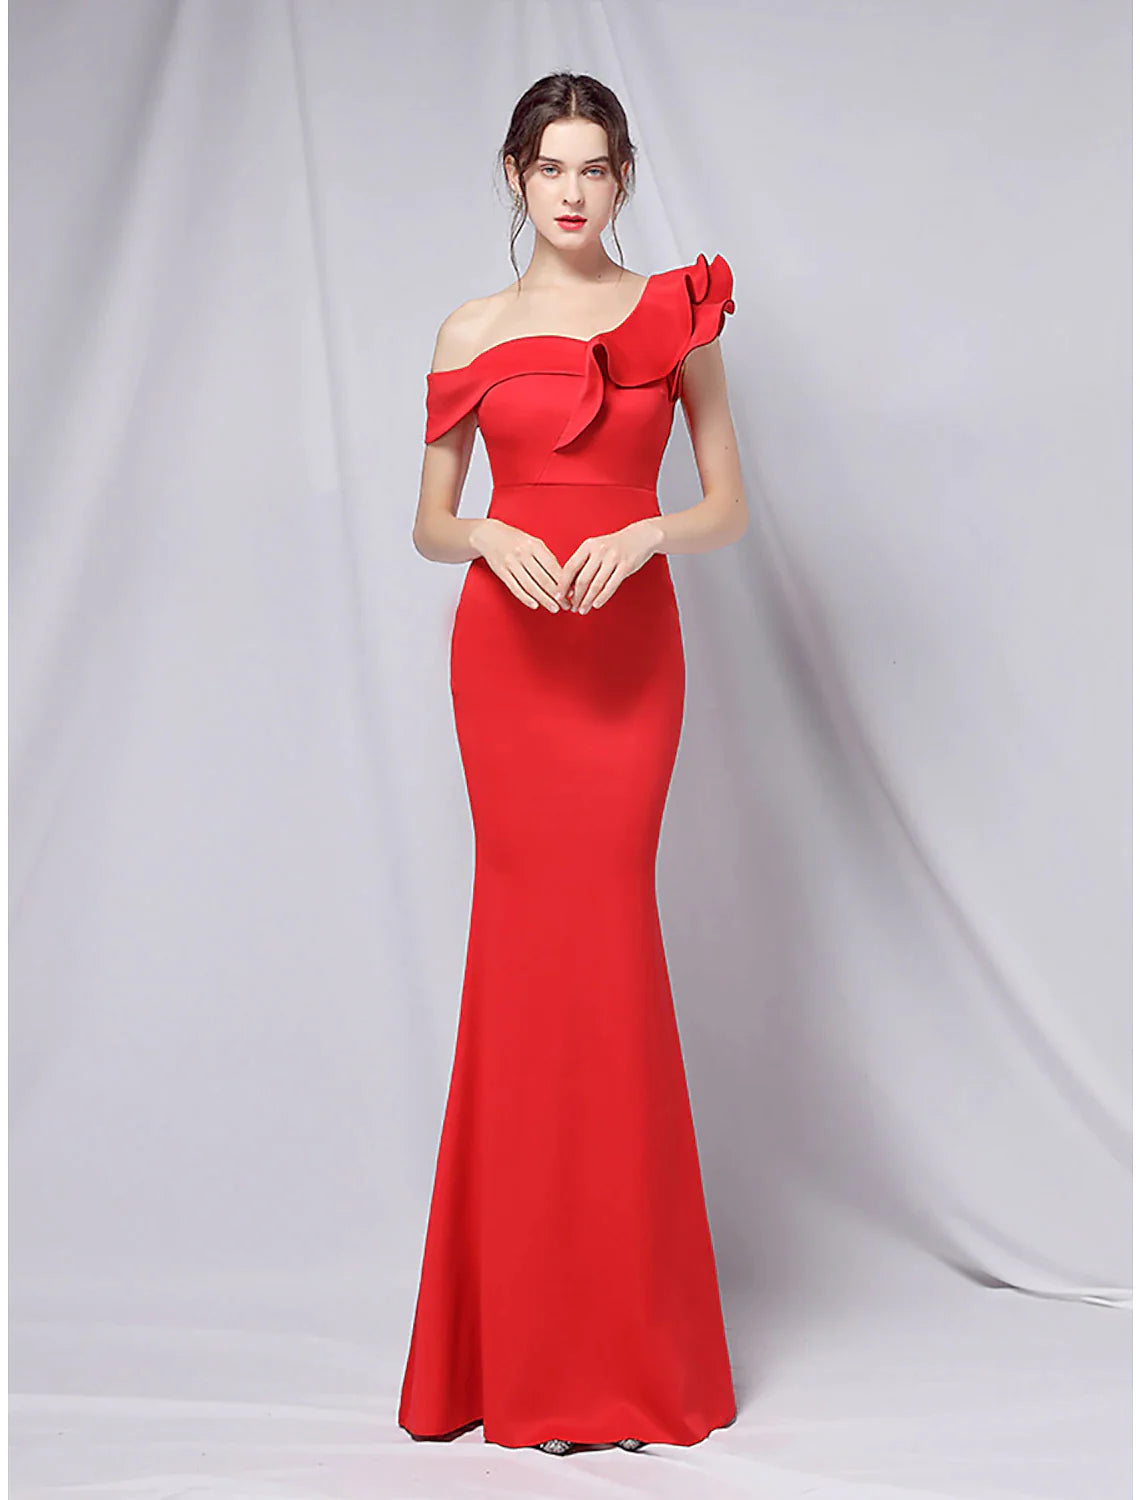 Mermaid / Trumpet Evening Gown Empire Dress Wedding Guest Floor Length Short Sleeve One Shoulder Stretch Satin with Ruffles